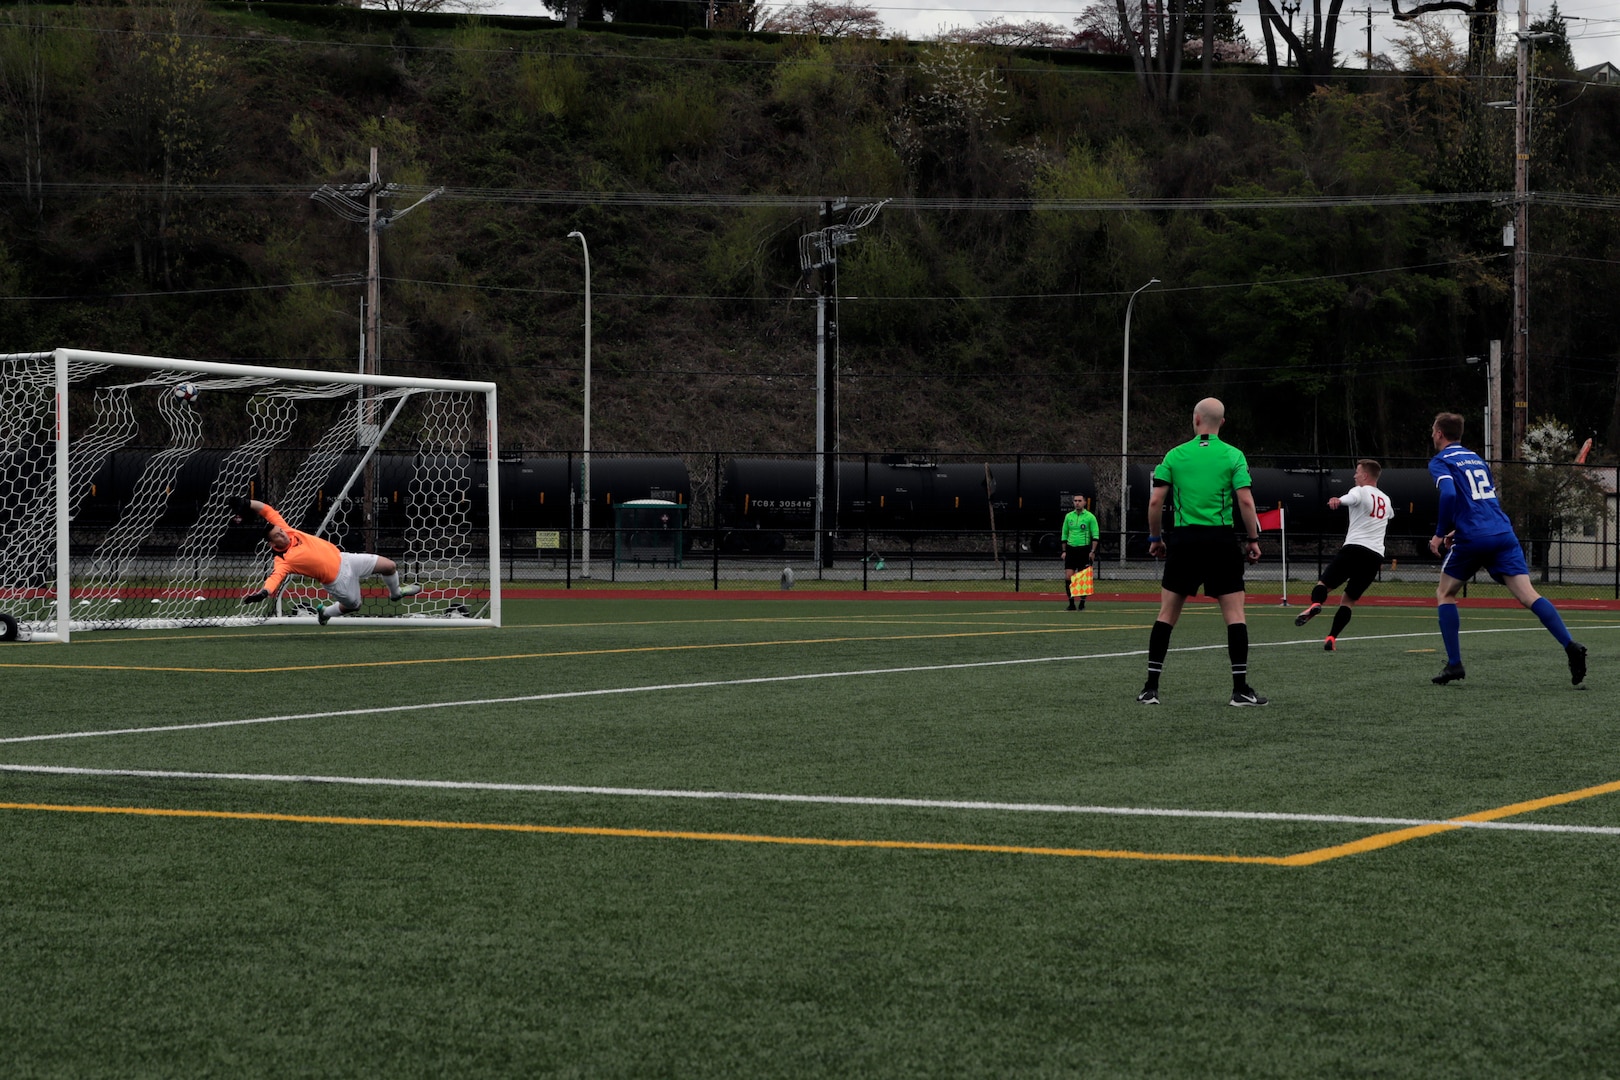 NAVAL STATION EVERETT, Wash.  (April 14, 2019) Marine Lance Corporal Nicholas Heath (#18) of MCB Camp Lejeune, N.C. scores on the penalty kick, registering his second goal of the match and third of the tournament against Air Force during the 2019 Armed Forces Men's Soccer Championship held at Naval Station Everett, Wash. from 14-20 April, featuring Service members from the Army, Marine Corps, Navy (including Coast Guard) and Air Force. (U.S. Navy photo by MC2 Ian Carver/Released)